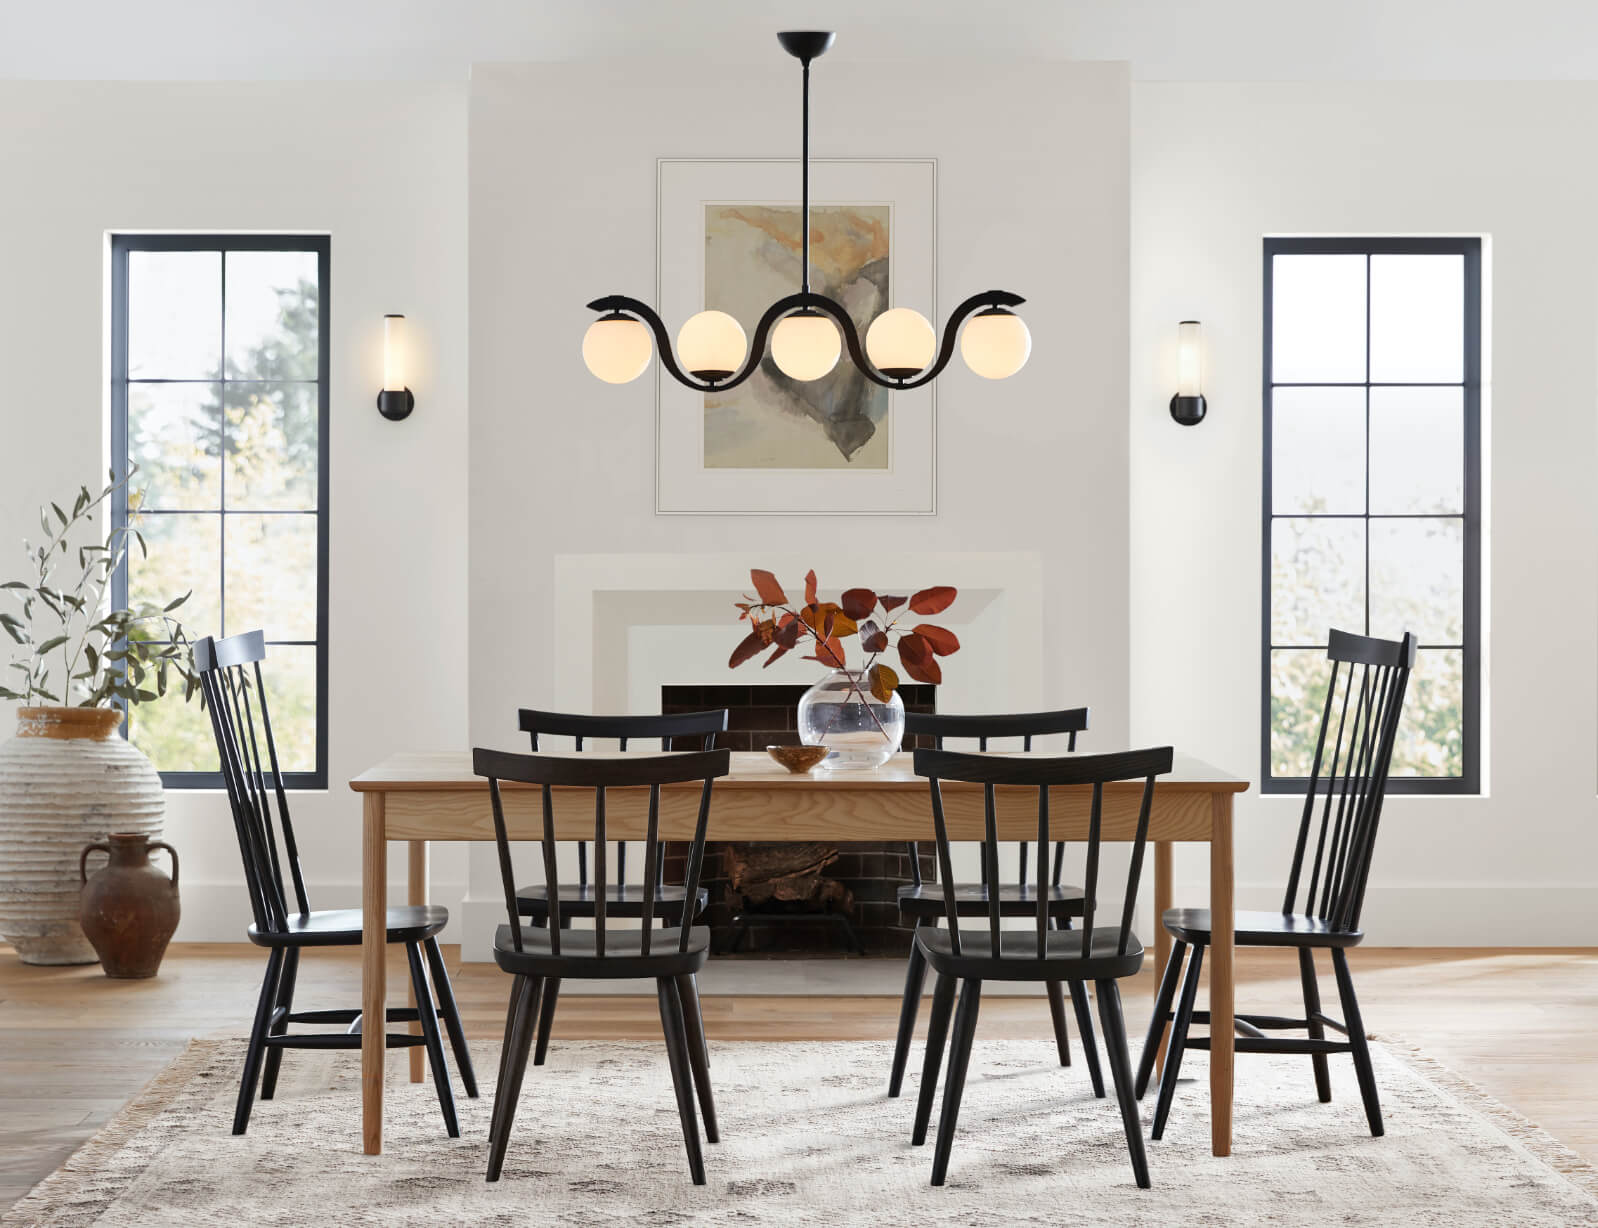 How To Choose Dining Room Lighting, What Size Chandelier Over 72 Inch Table